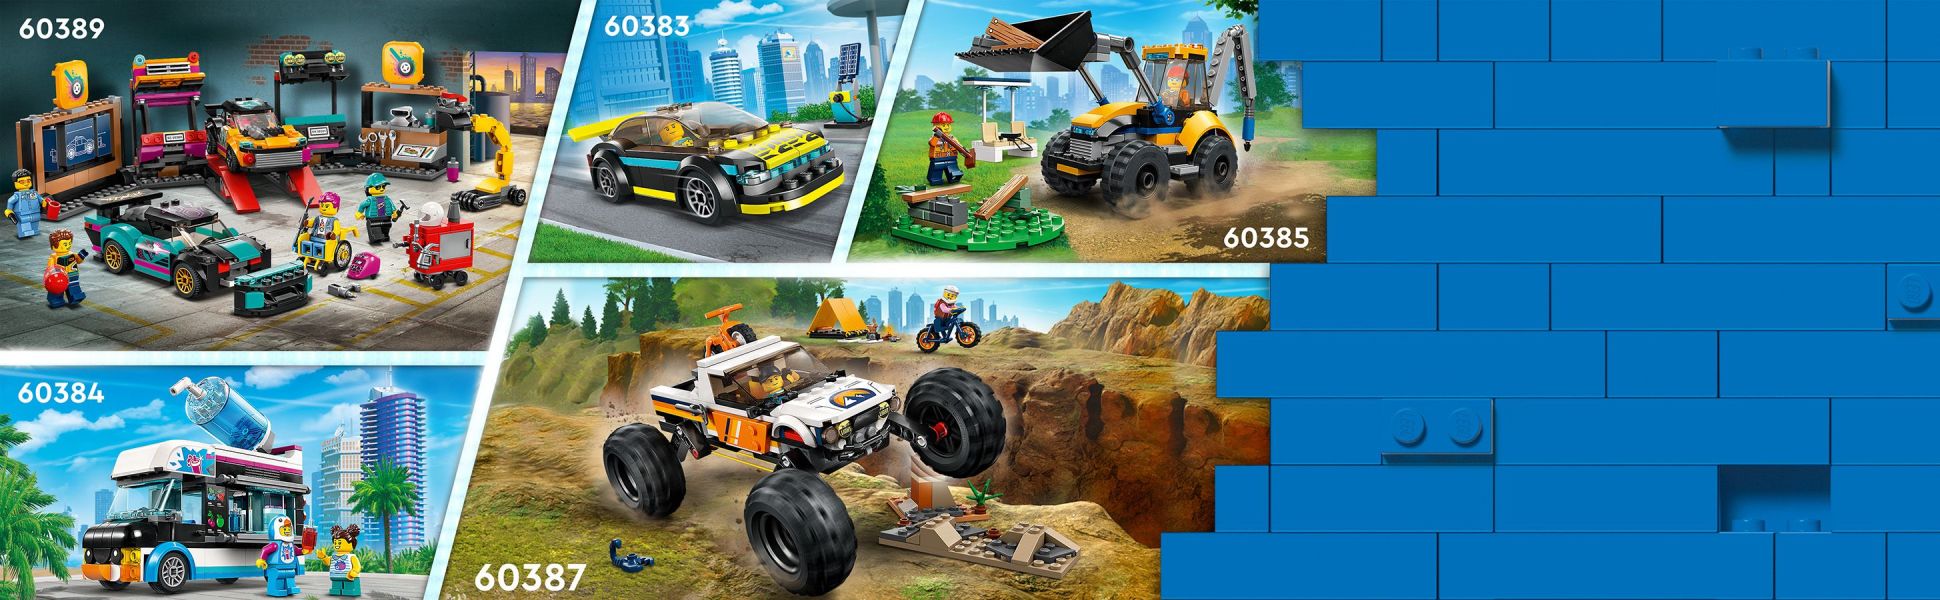 Set and Suspension Off-Roader Building Ages Toy Adventures Minifigures, Toy Camping City Mountain 60387 Style 4x4 with Including Kids 6+ Car Working Vehicle LEGO 2 Monster for Truck - Bikes,